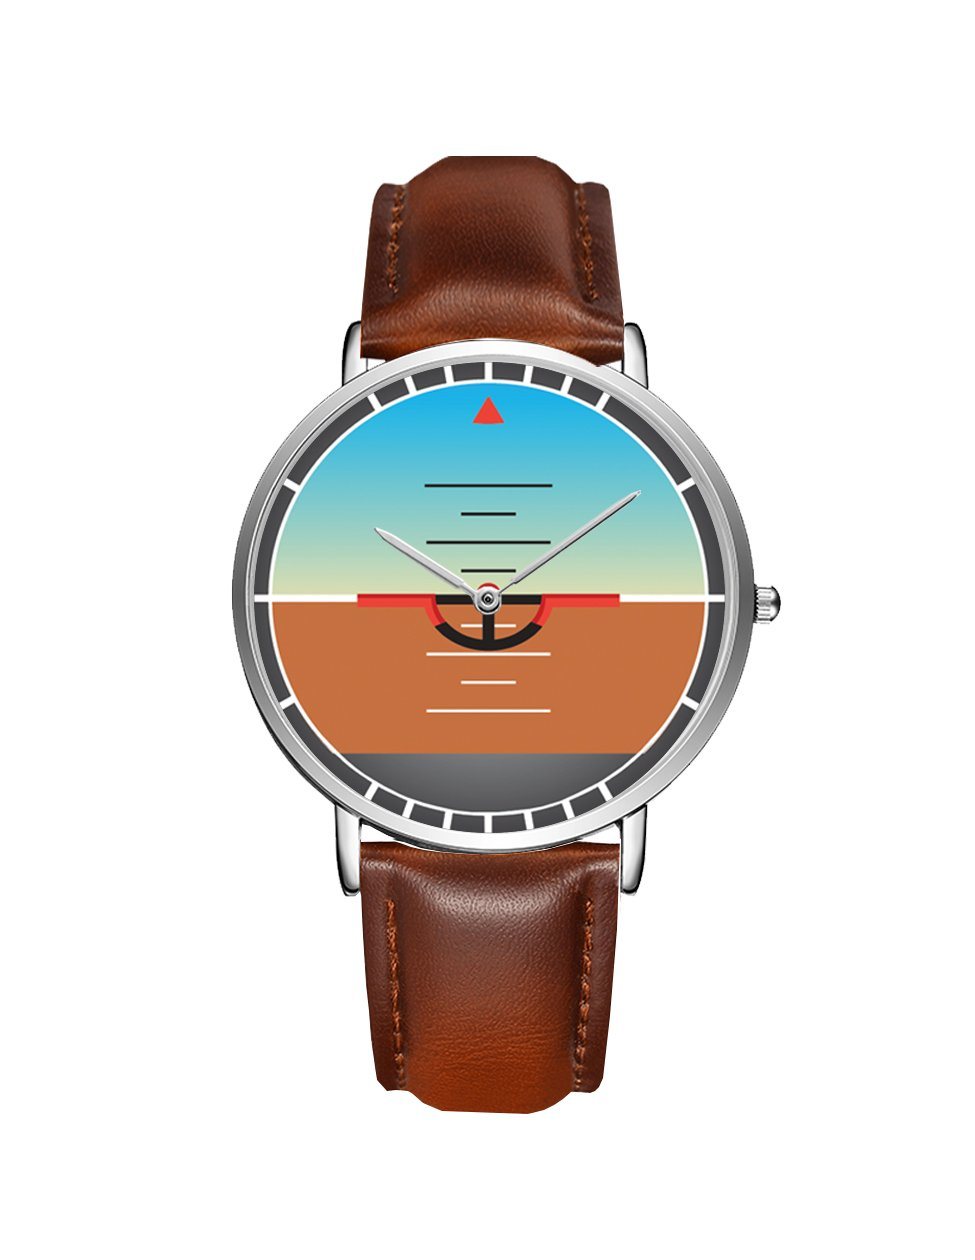 Airplane Instrument Series (Gyro Horizon) Leather Strap Watches Pilot Eyes Store Silver & Brown Leather Strap 